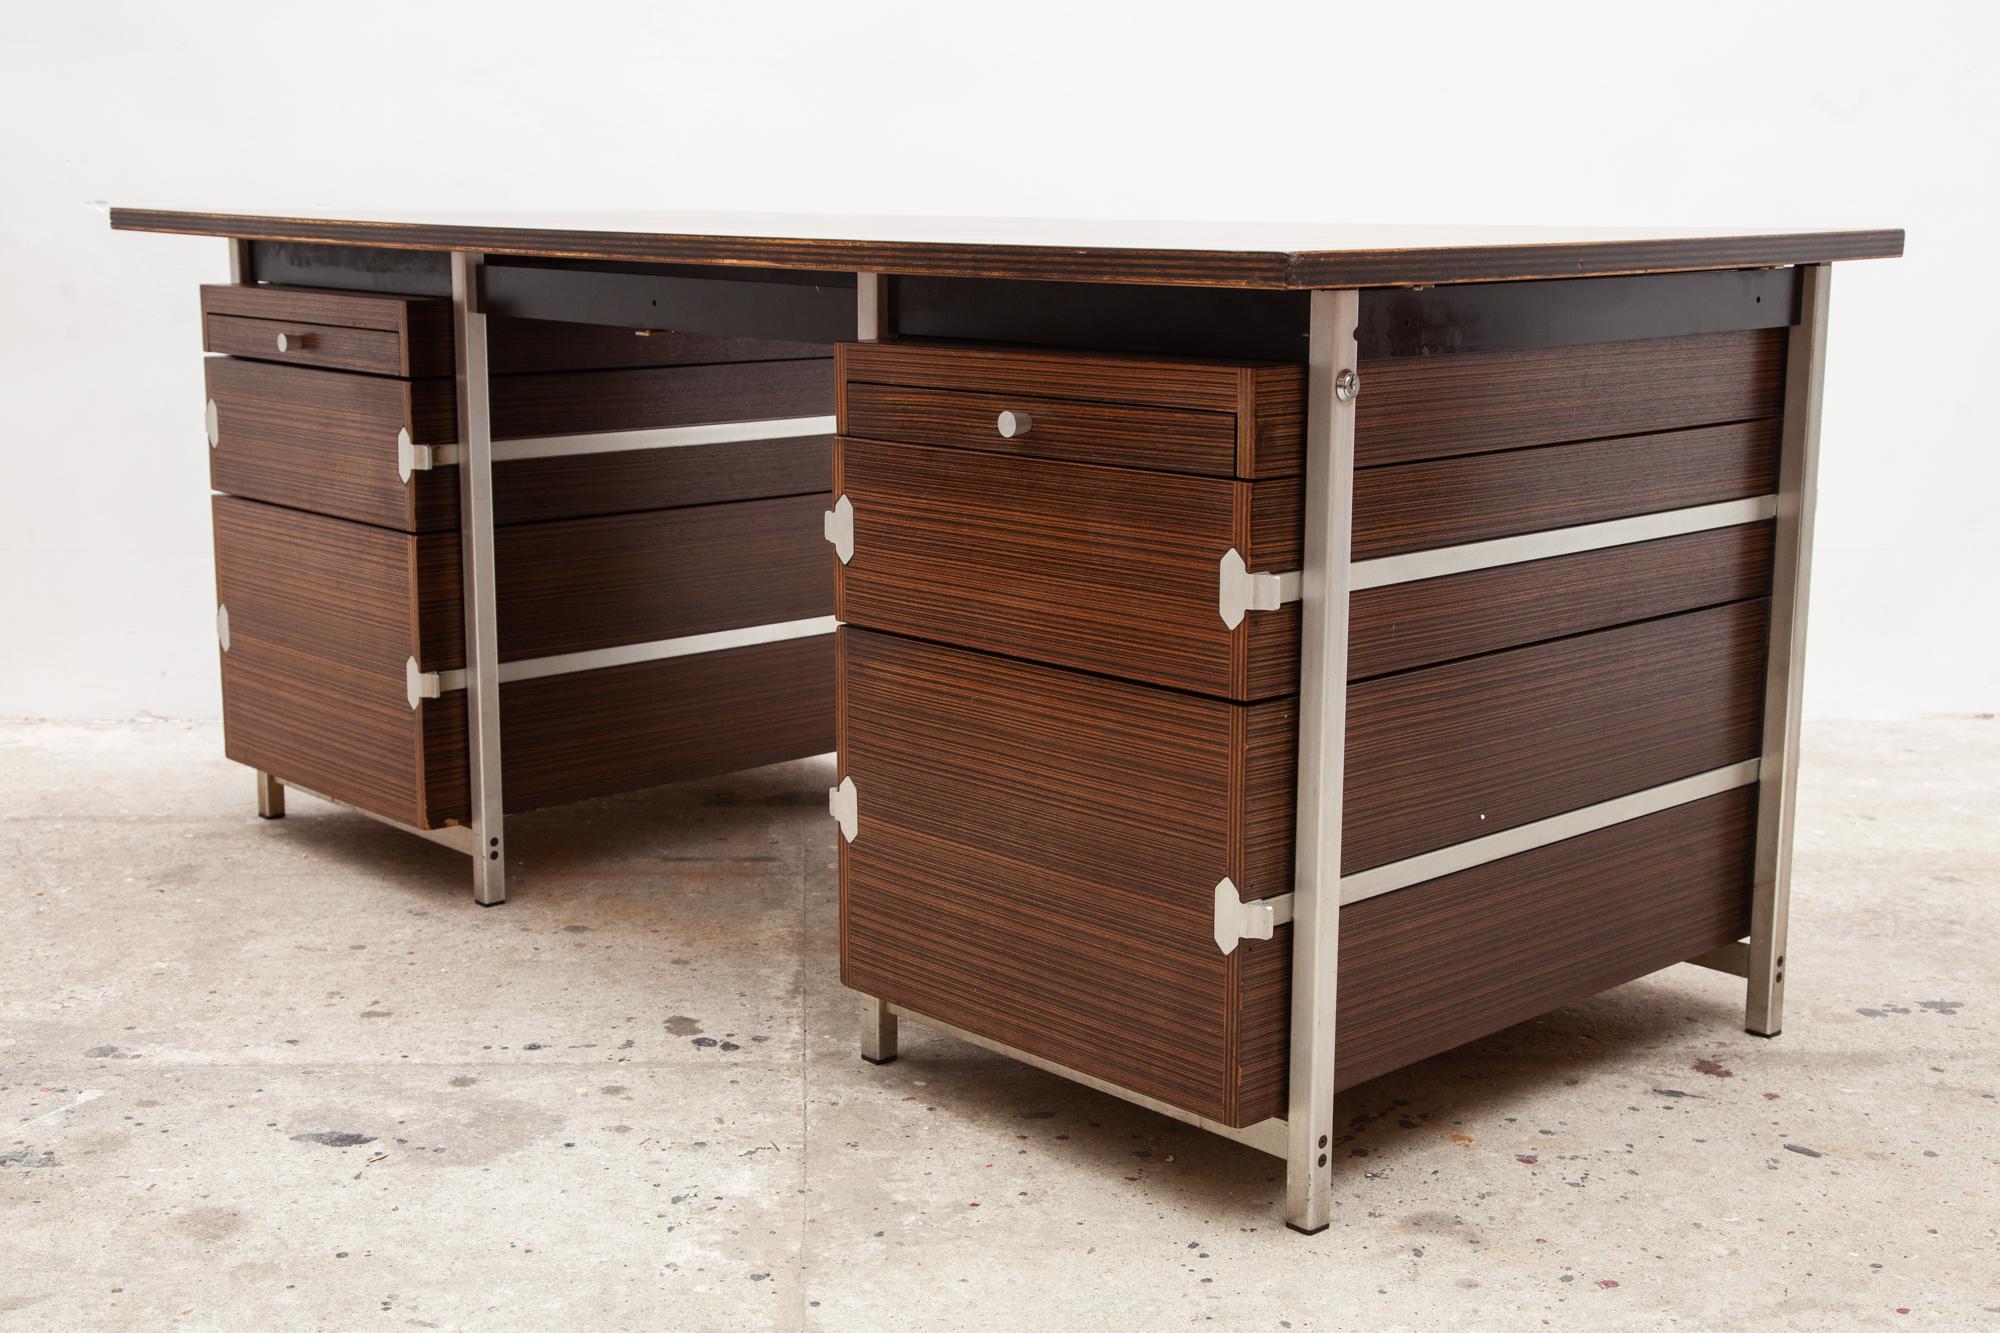 Midcentury floating top office desk 1969, designed by Jules Wabbes for Atelier Bergwood, Brussel.
This desk with two-drawer compartments executed in an aluminum frame with a rectangular top in rosewood made of plywood.
Jules Wabbes / Universal